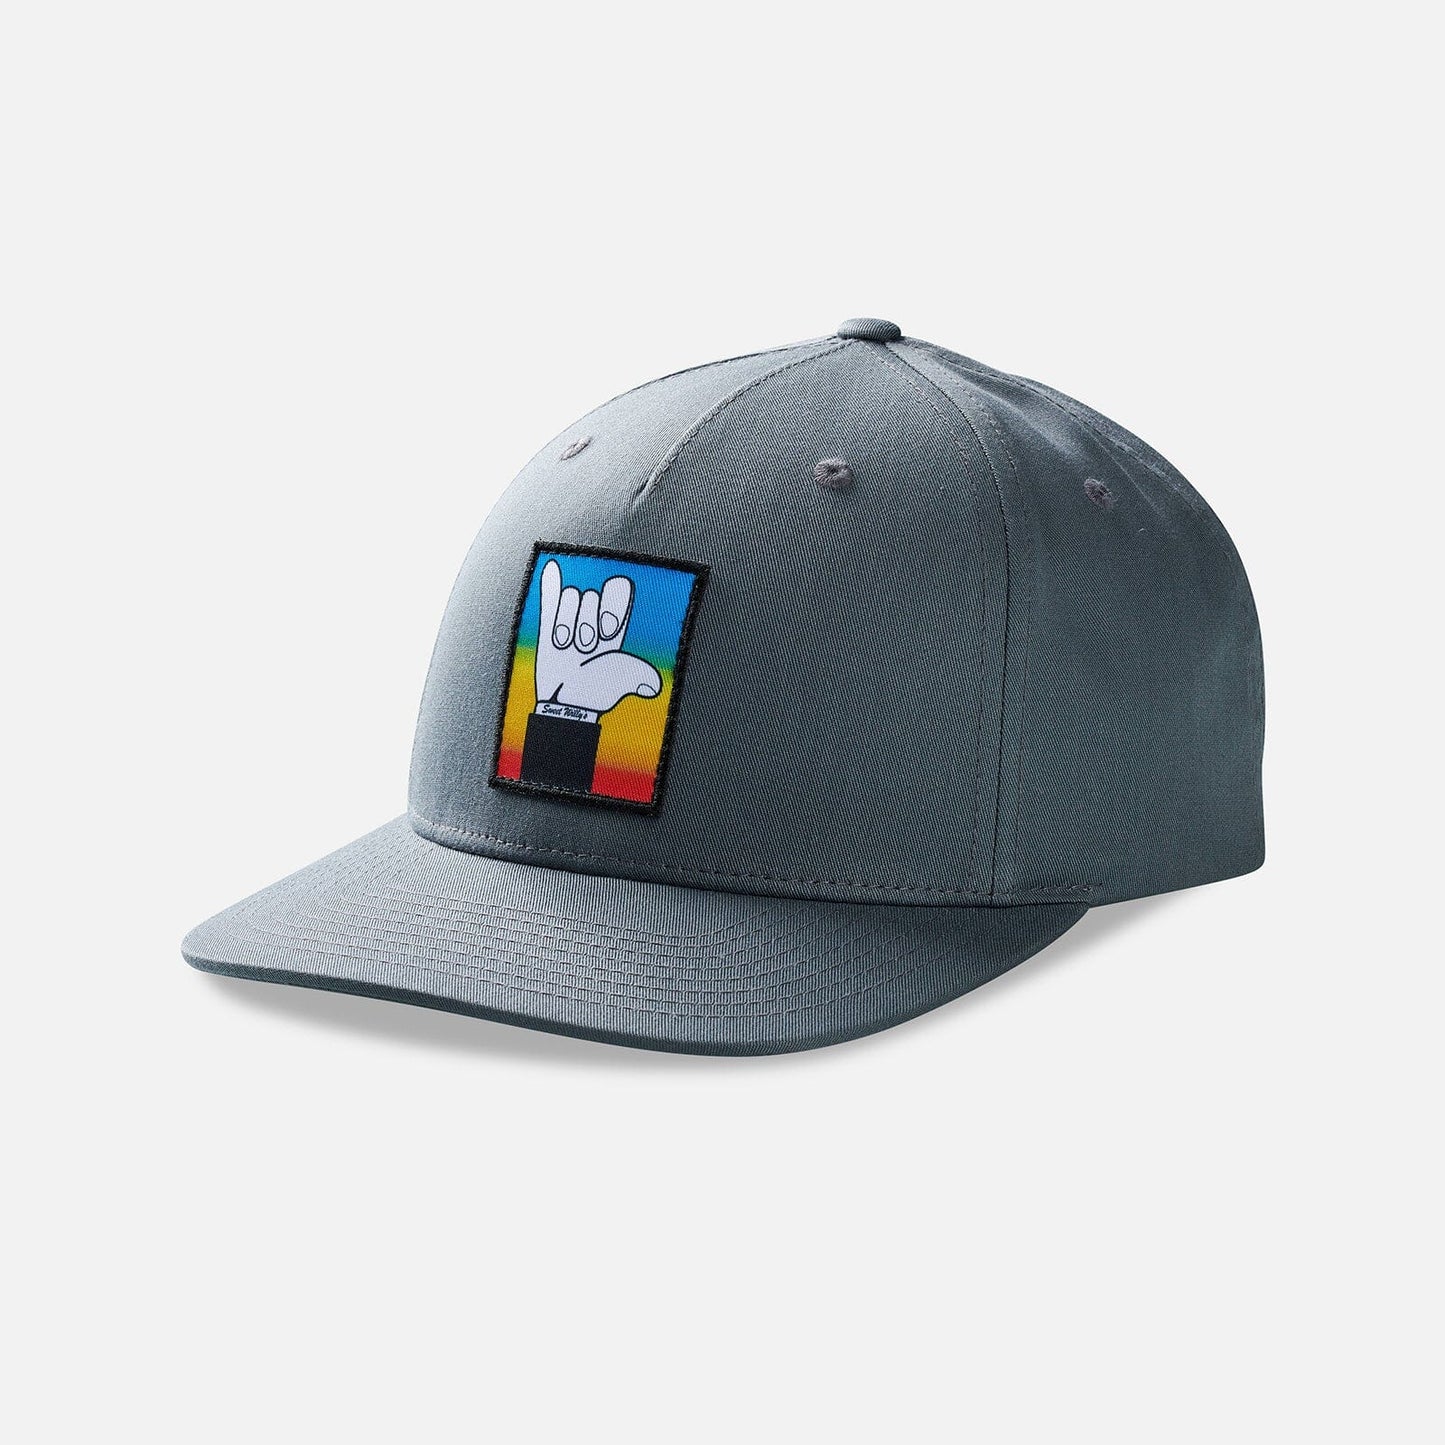 SOUTH SWELL X Sweet Willy's Tribute Flat Bill Hat Hats SOUTH SWELL 